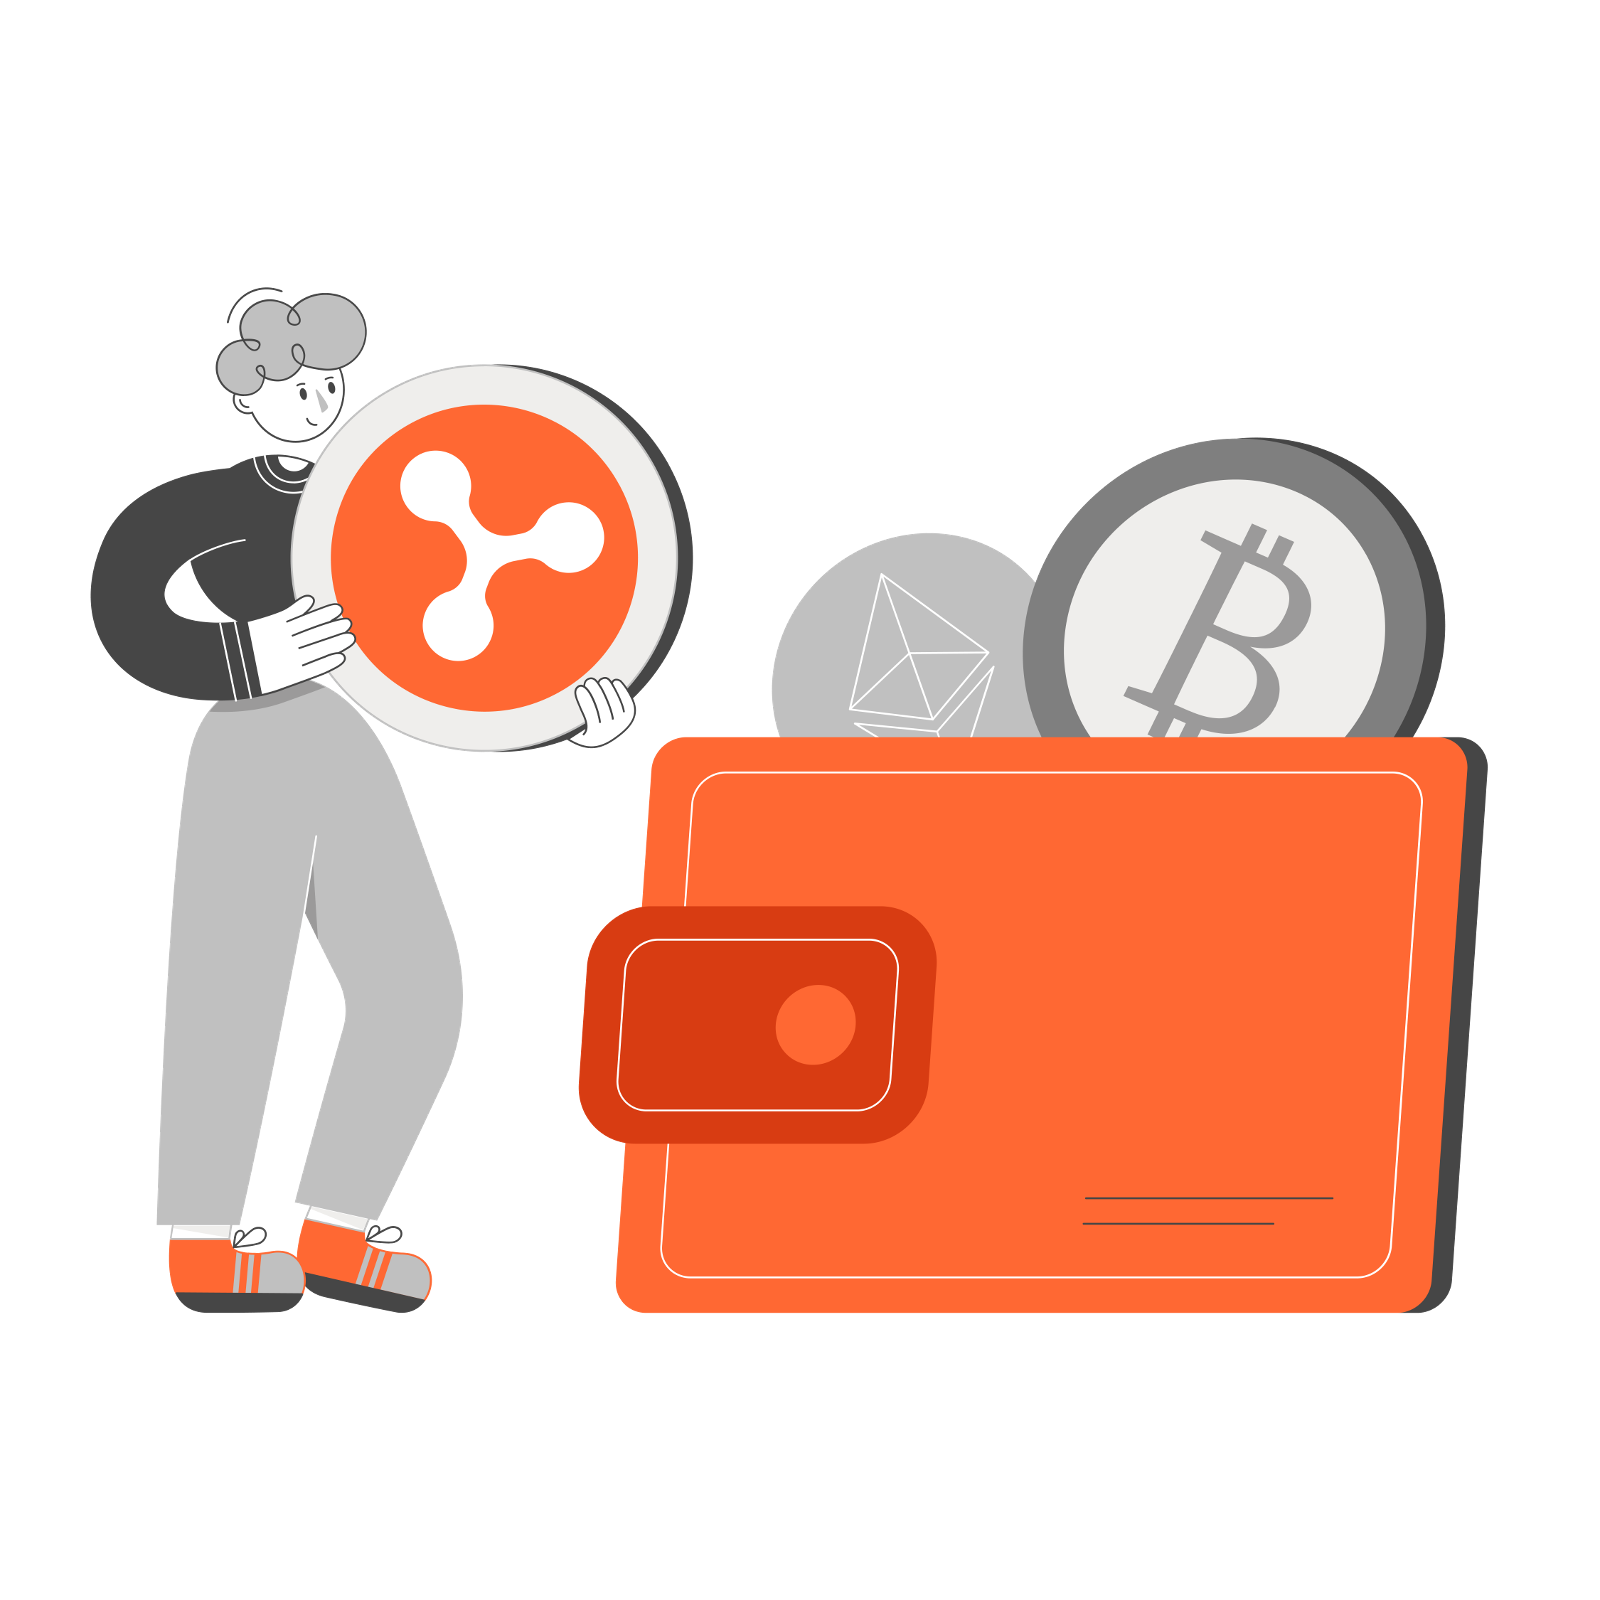 Personal cryptocurrency wallet